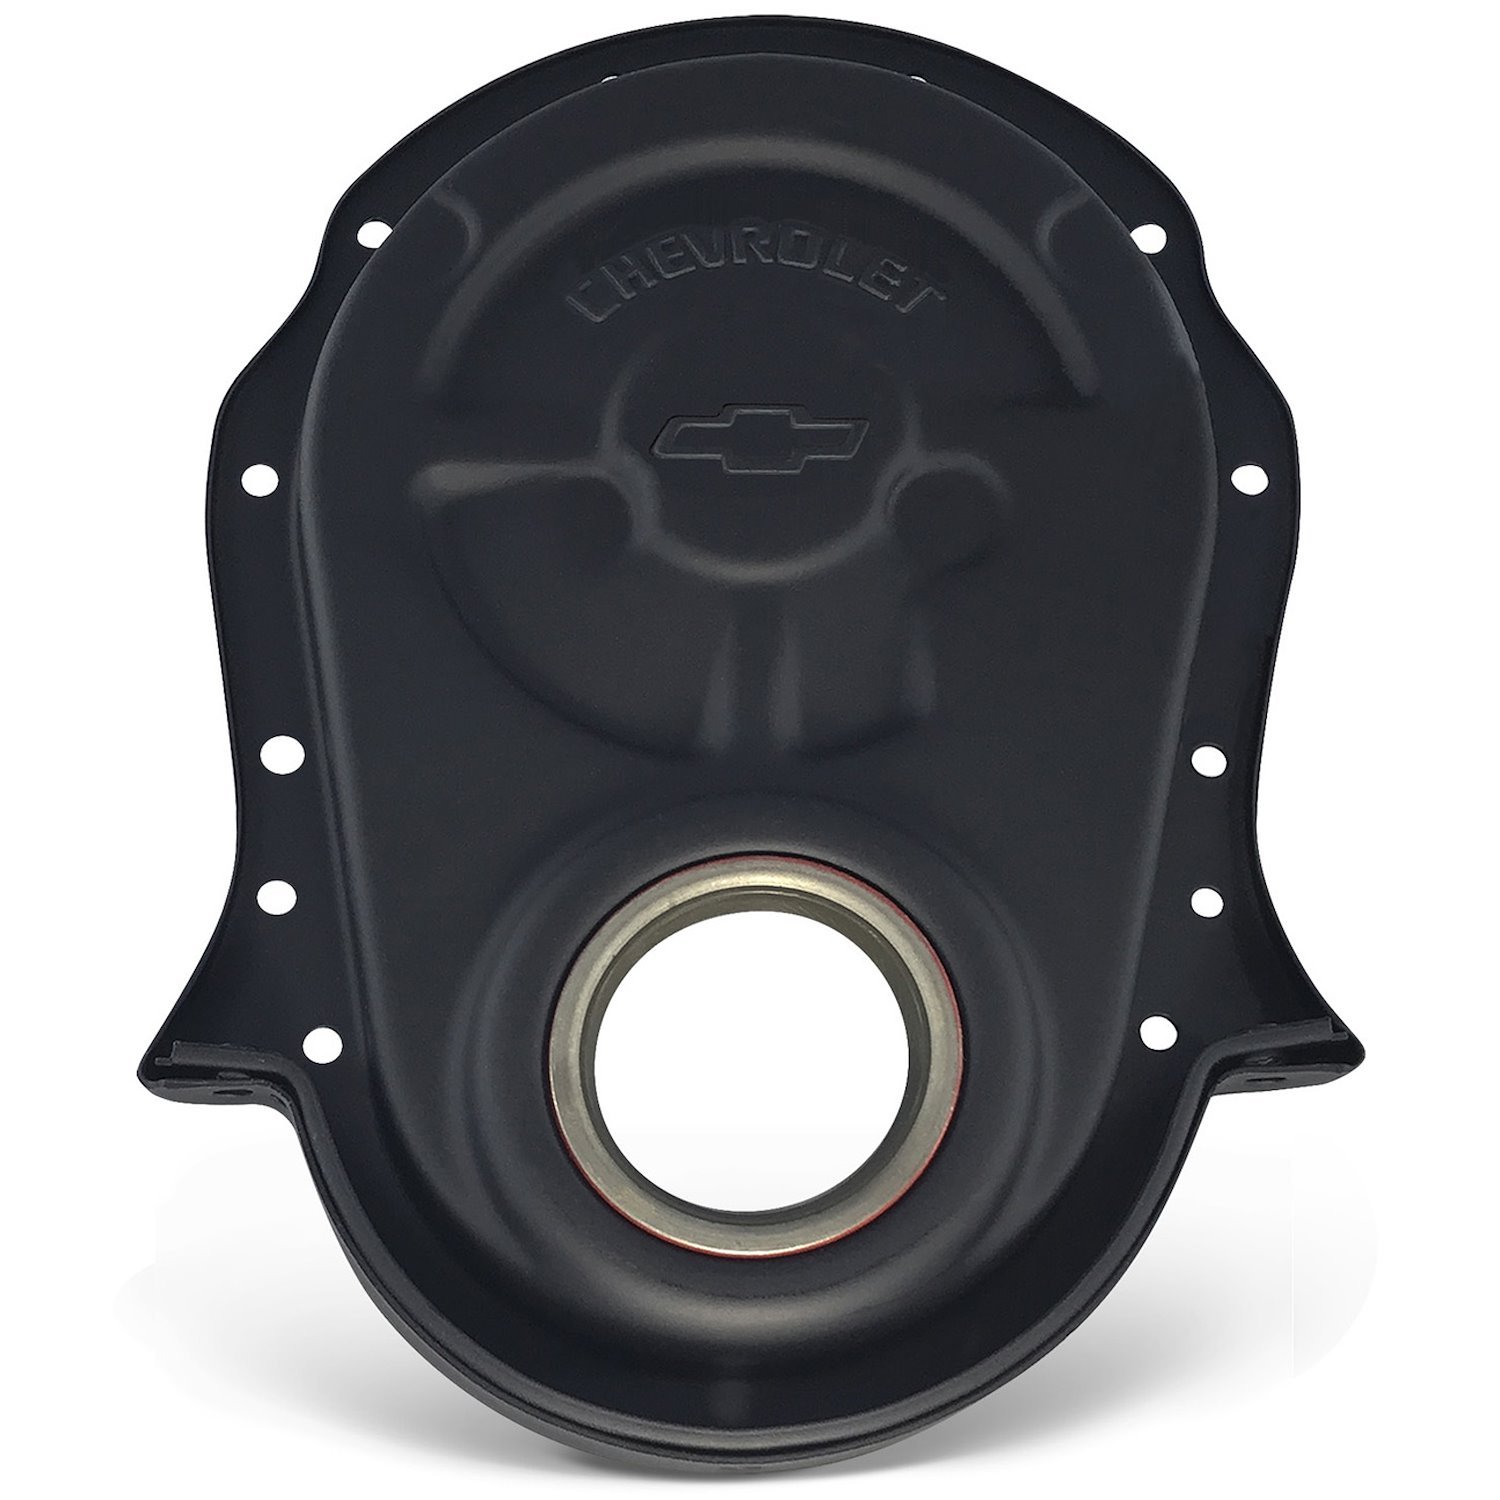 Steel Timing Chain Cover for 1965-1990 Big Block Chevy [Black Crinkle]